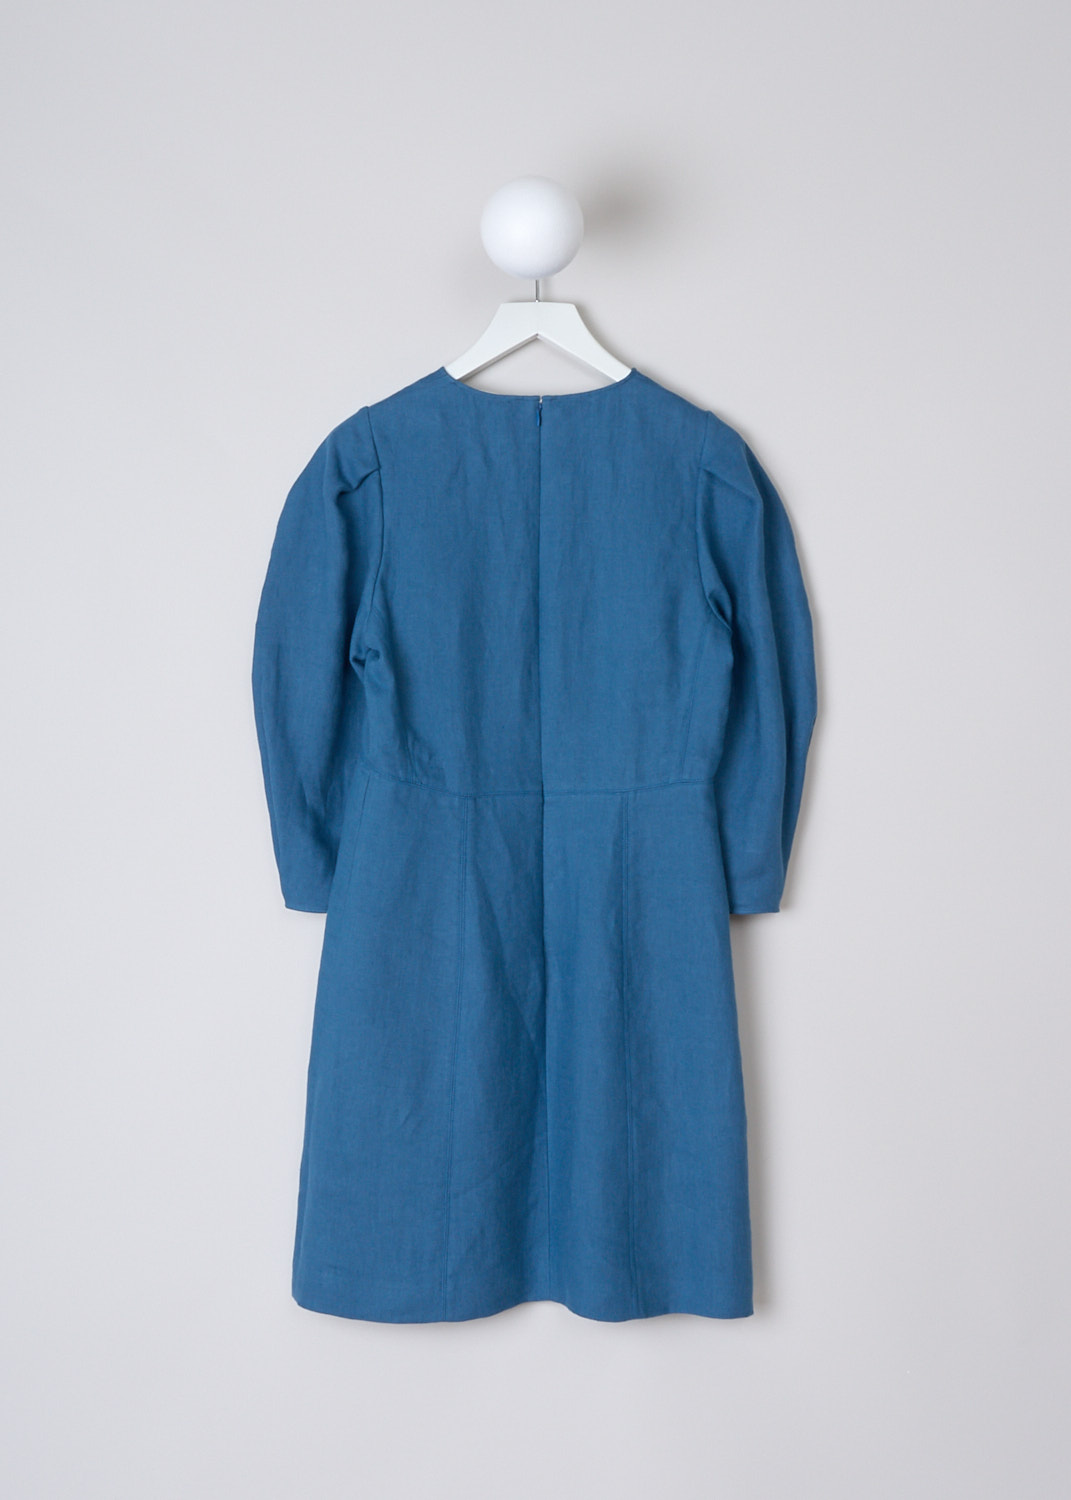 CHLOÉ, OPAL BLUE LINEN DRESS WITH BALLOON SLEEVES, CHC23URO3903144A_OPAL_BLUE, Blue, Back, This Opal Blue linen mini dress has a round neckline. The dress has  three-quarter balloon sleeves with straight endings. The dress has a slight A-line silhouette. In the back, a concealed centre hook and zip function as the closure. 

